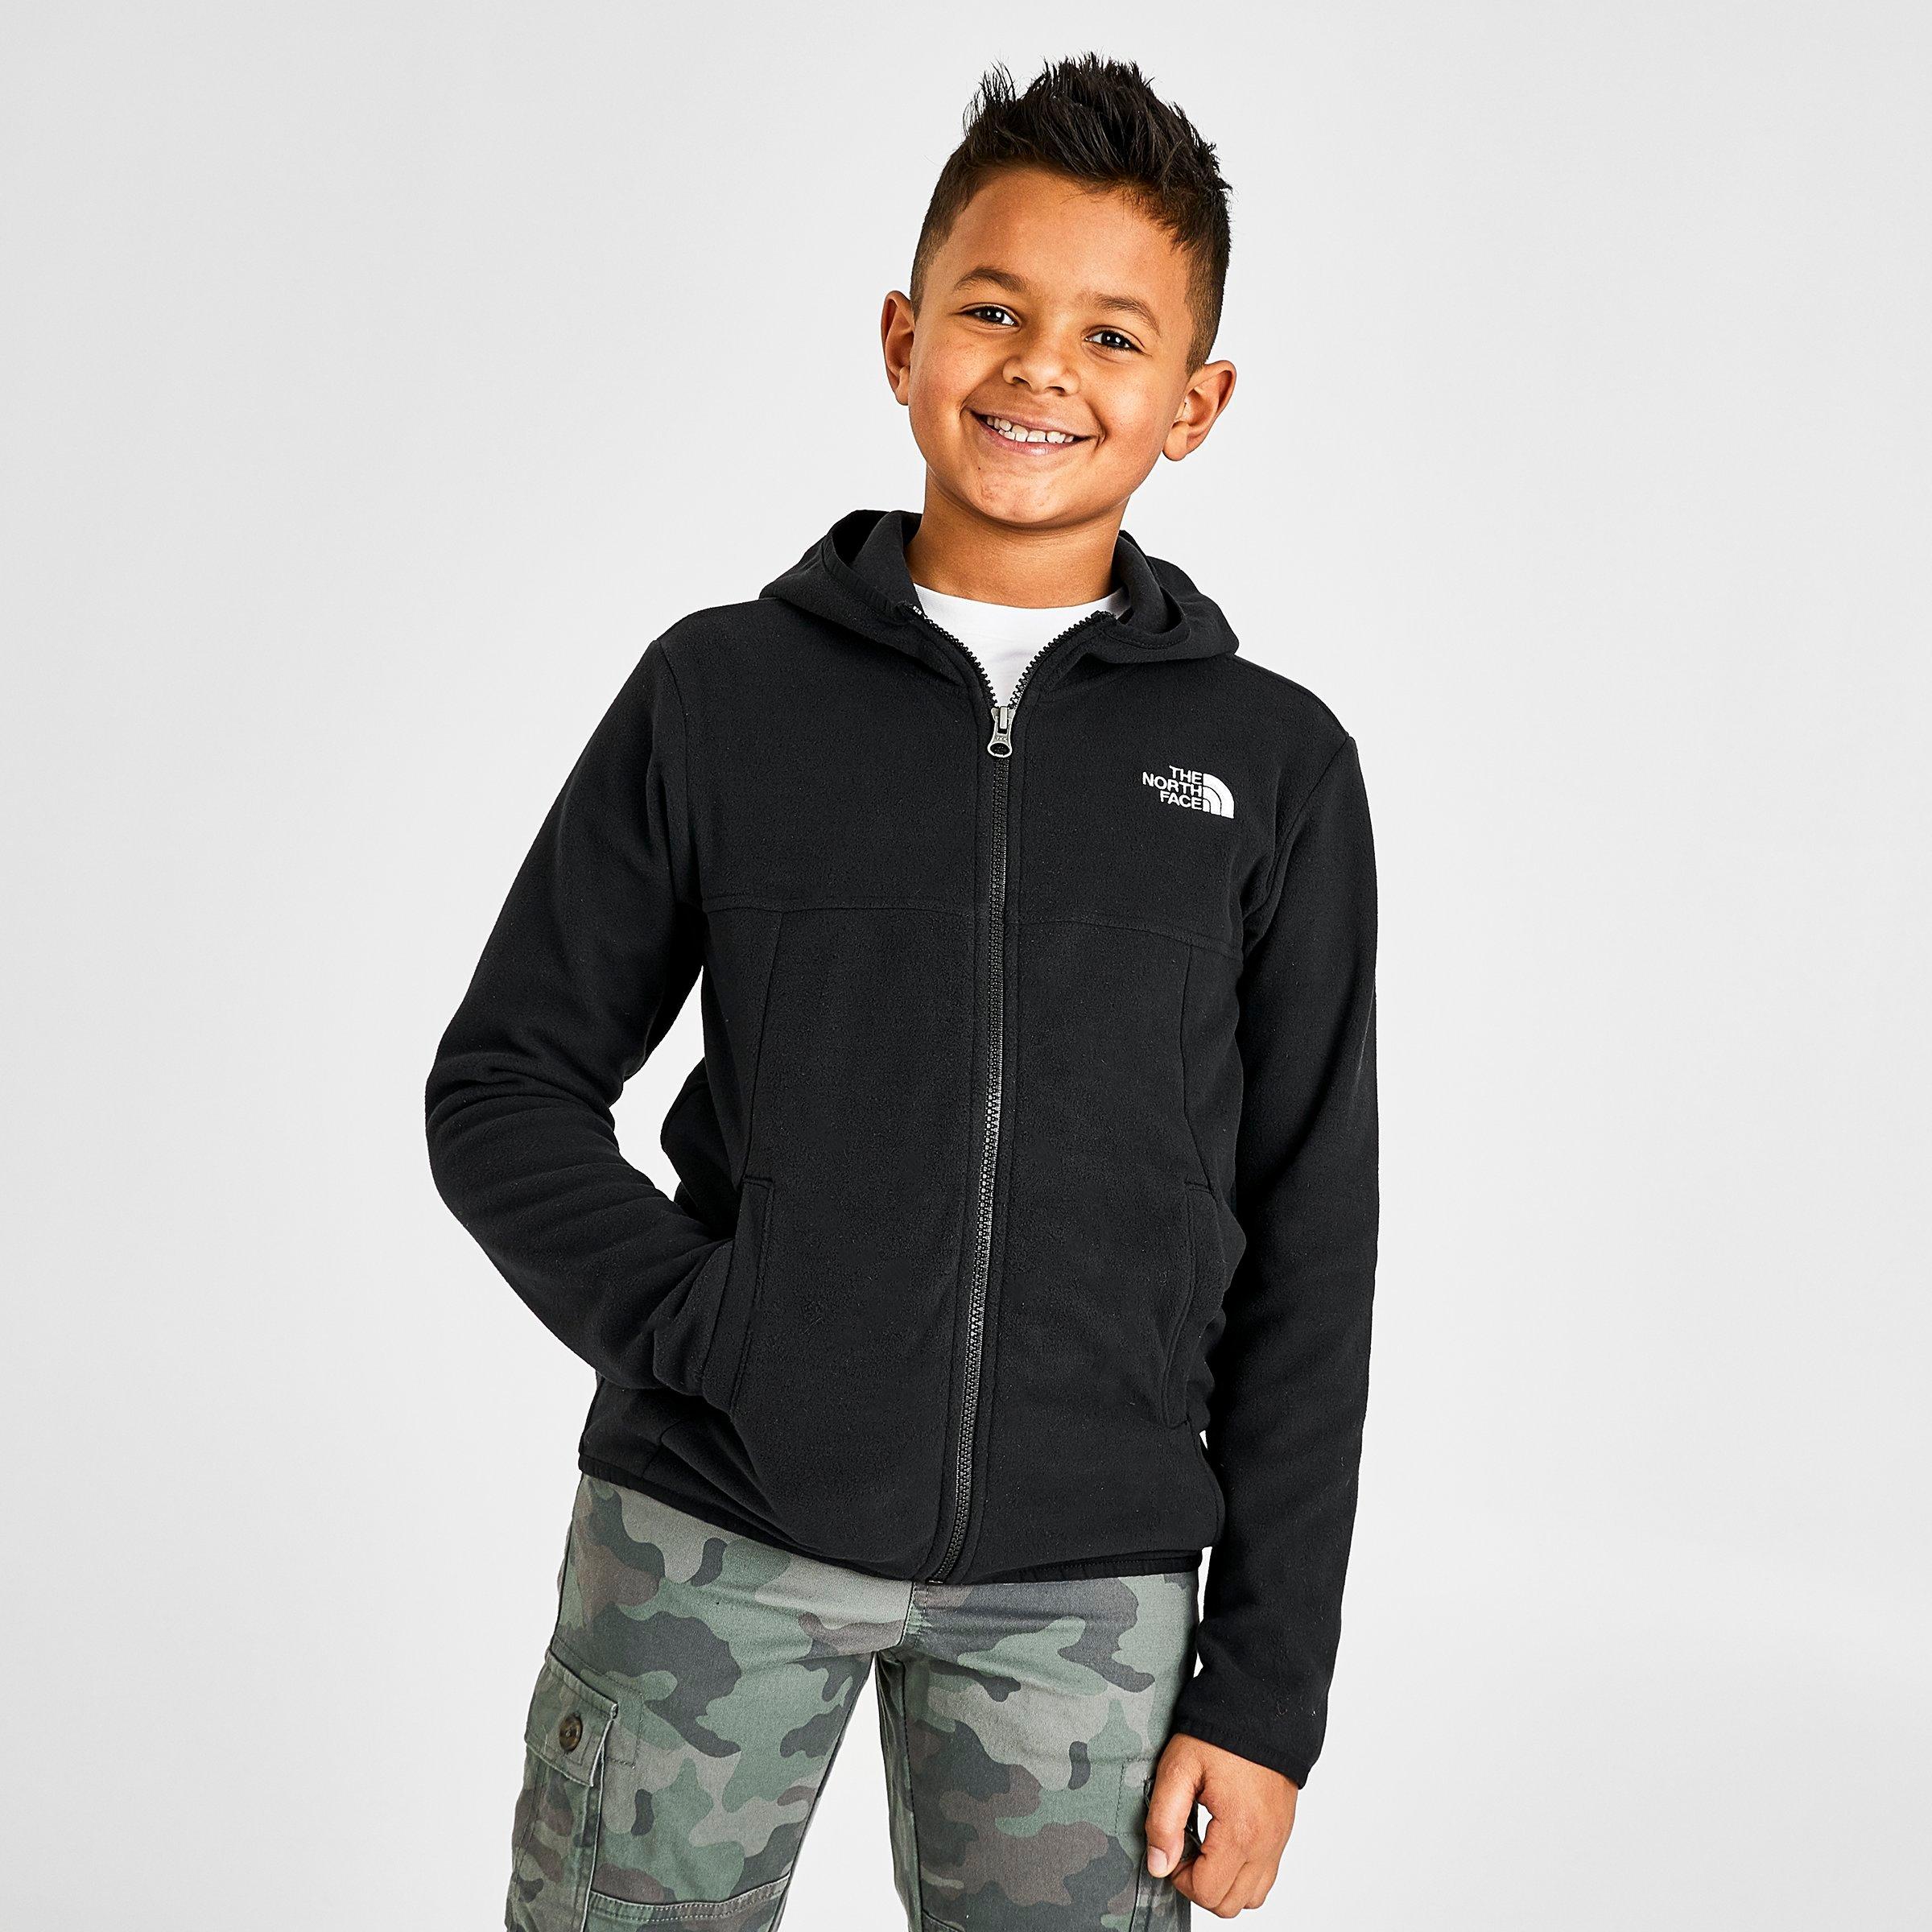 UPC 192826364111 product image for The North Face Inc Boys' Glacier Full-Zip Hoodie in Black Size Medium Polyester/ | upcitemdb.com